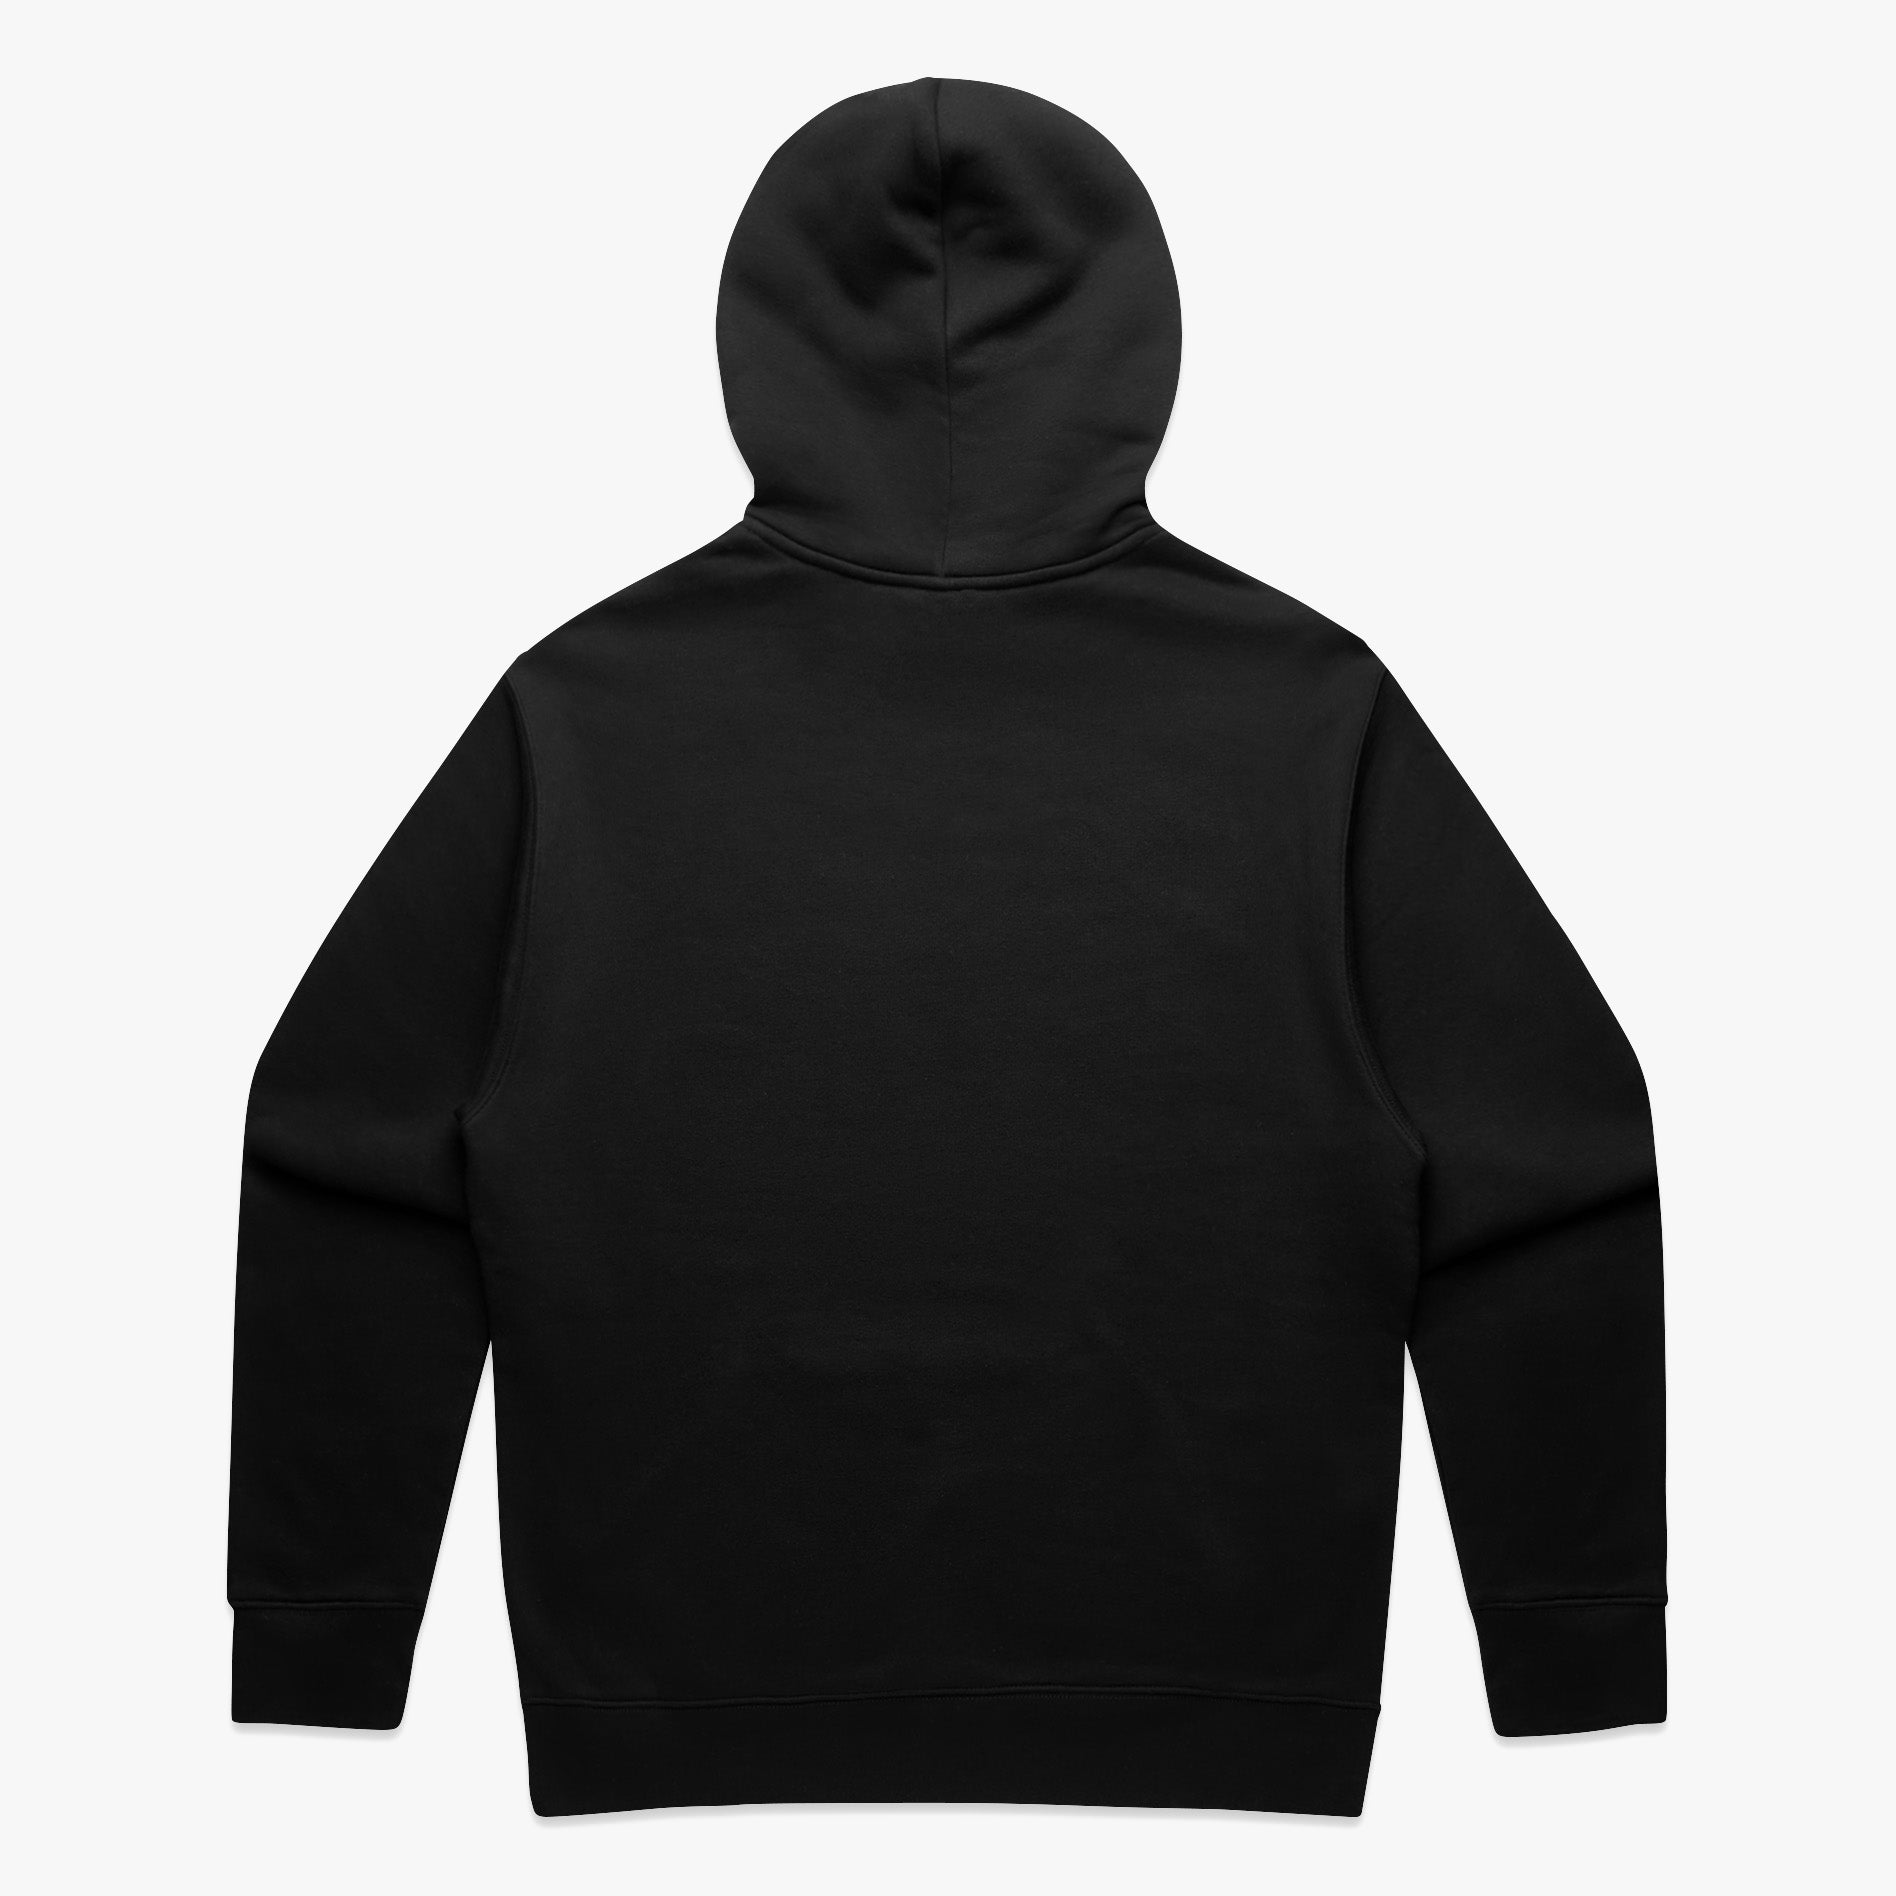 SHEEPEY Gothic Relax Hoodie Black